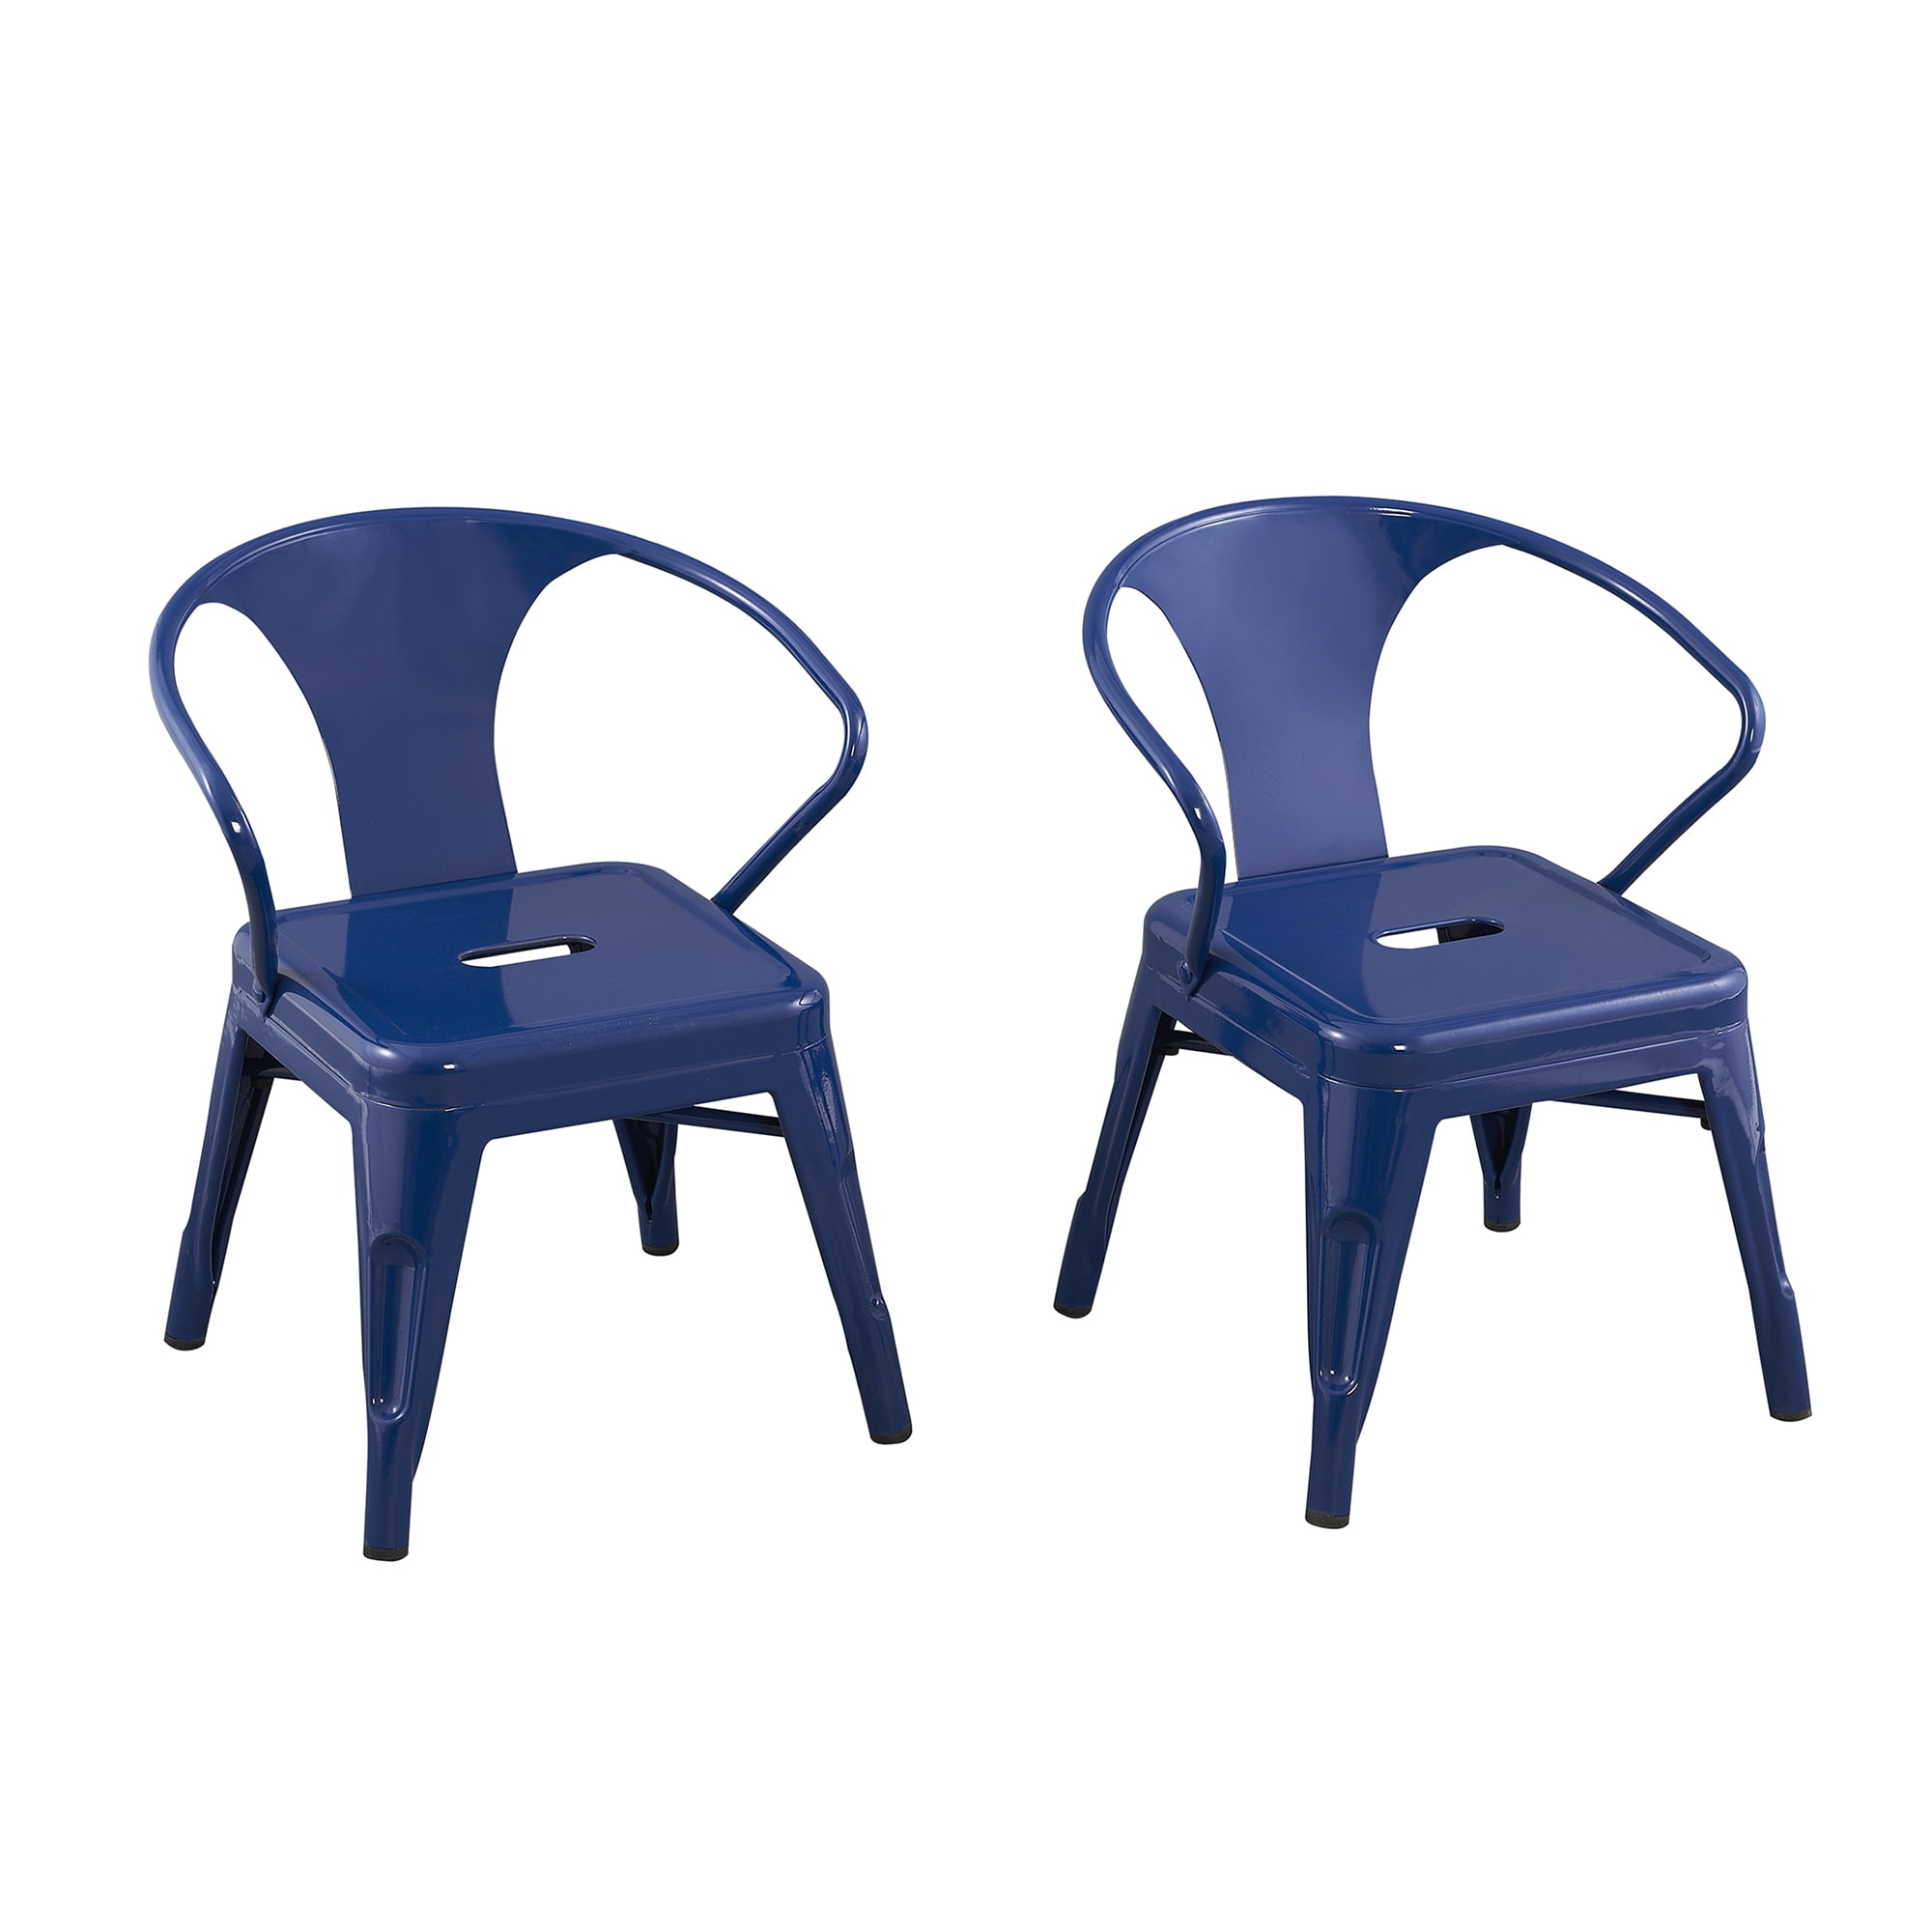 Gray, Kids Glossy Stacking & Metal Chair Harper Hudson ACEssentials Activity Finish 2 Pack -